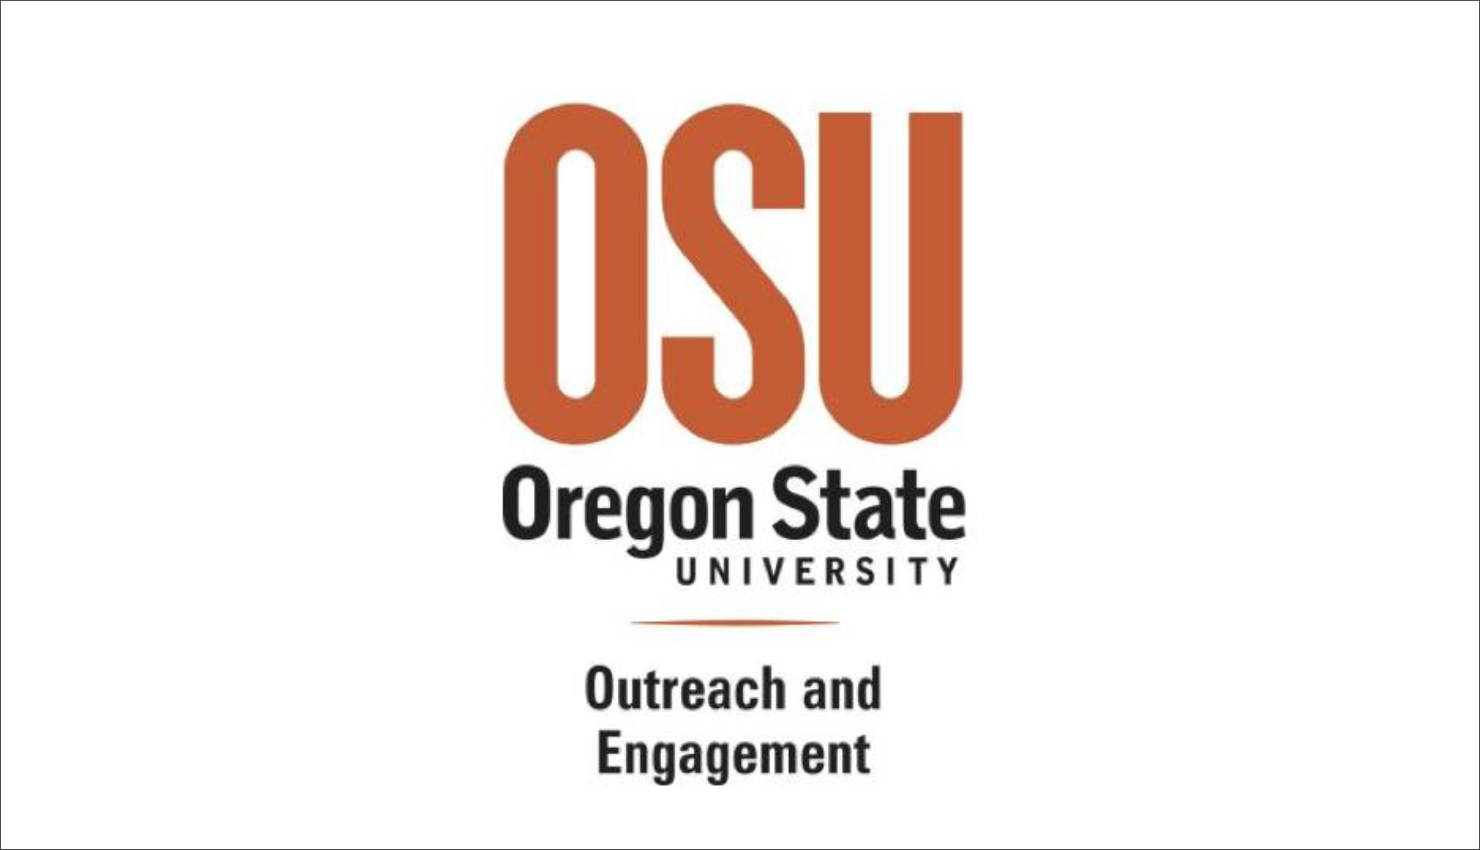 2007 outreach and engagement logo